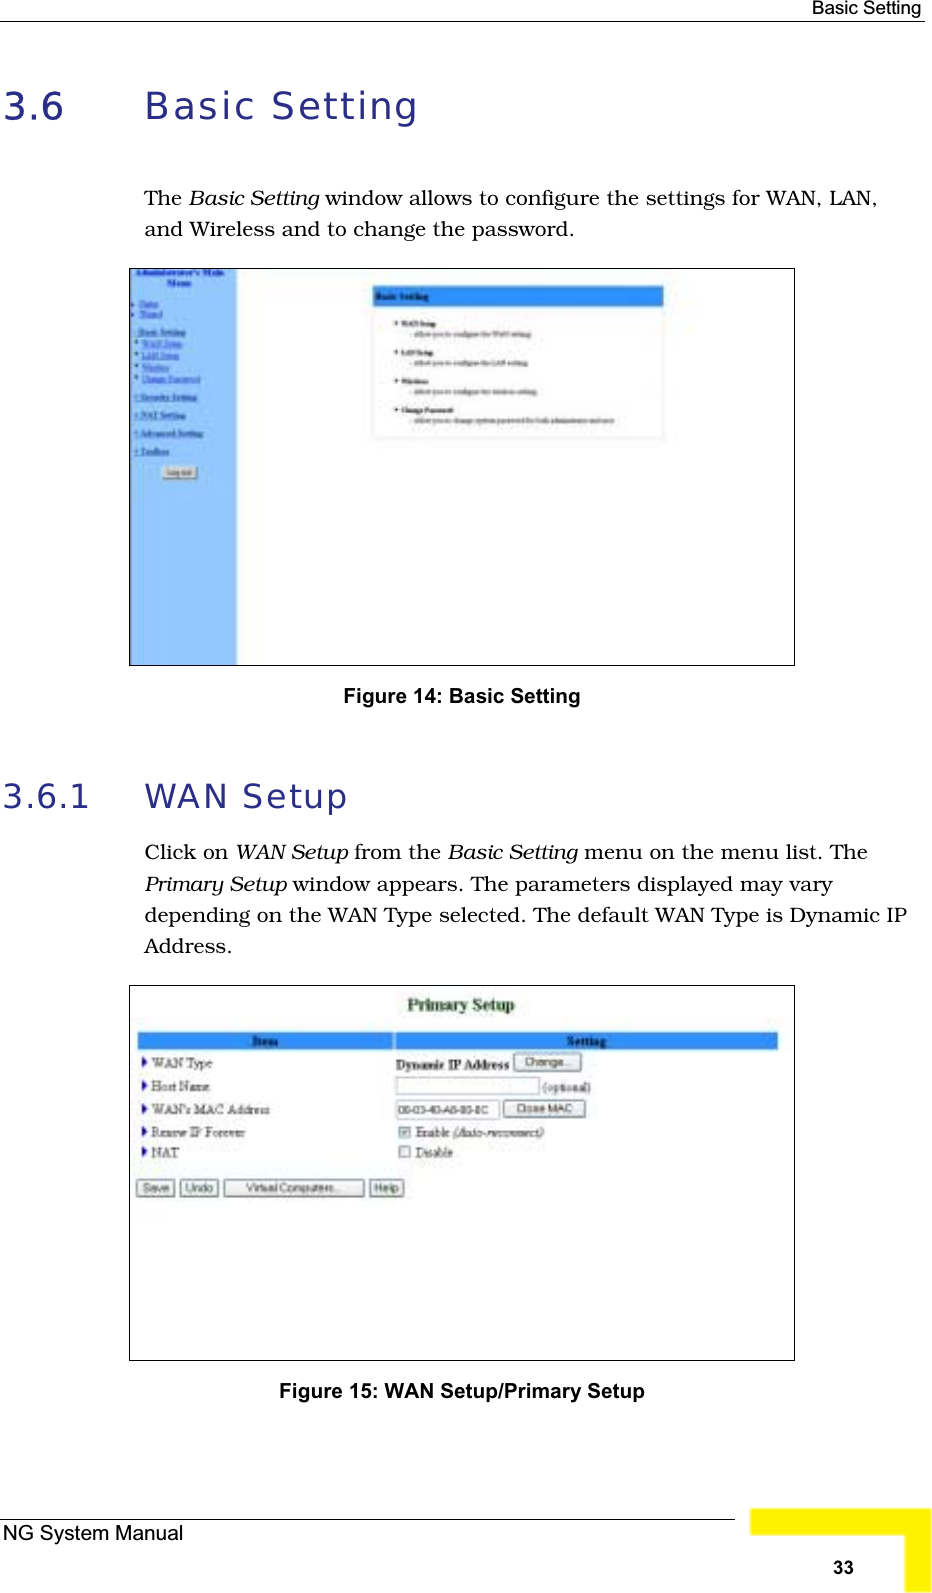 Basic Setting 3.6 Basic Setting The Basic Setting window allows to configure the settings for WAN, LAN,and Wireless and to change the password.Figure 14: Basic Setting3.6.1 WAN SetupClick on WAN Setup from the Basic Setting menu on the menu list. ThePrimary Setup window appears. The parameters displayed may varydepending on the WAN Type selected. The default WAN Type is Dynamic IPAddress.Figure 15: WAN Setup/Primary Setup NG System Manual33